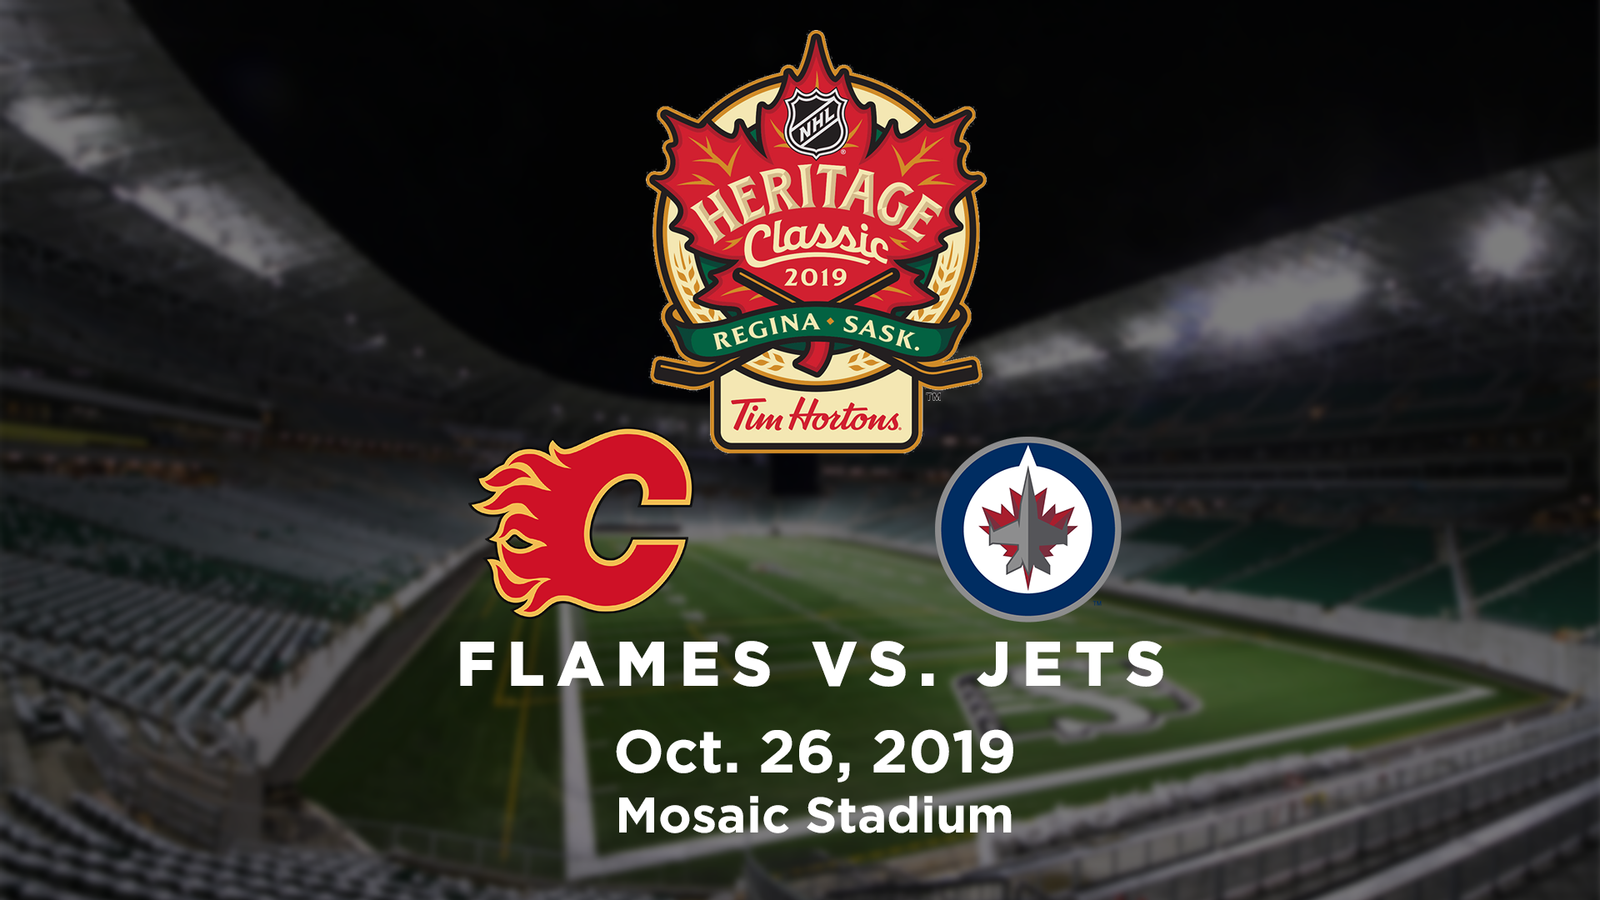 The 2019 Tim Hortons NHL Heritage Classic™ takes over Mosaic Stadium on Saturday, October 26, 2019!